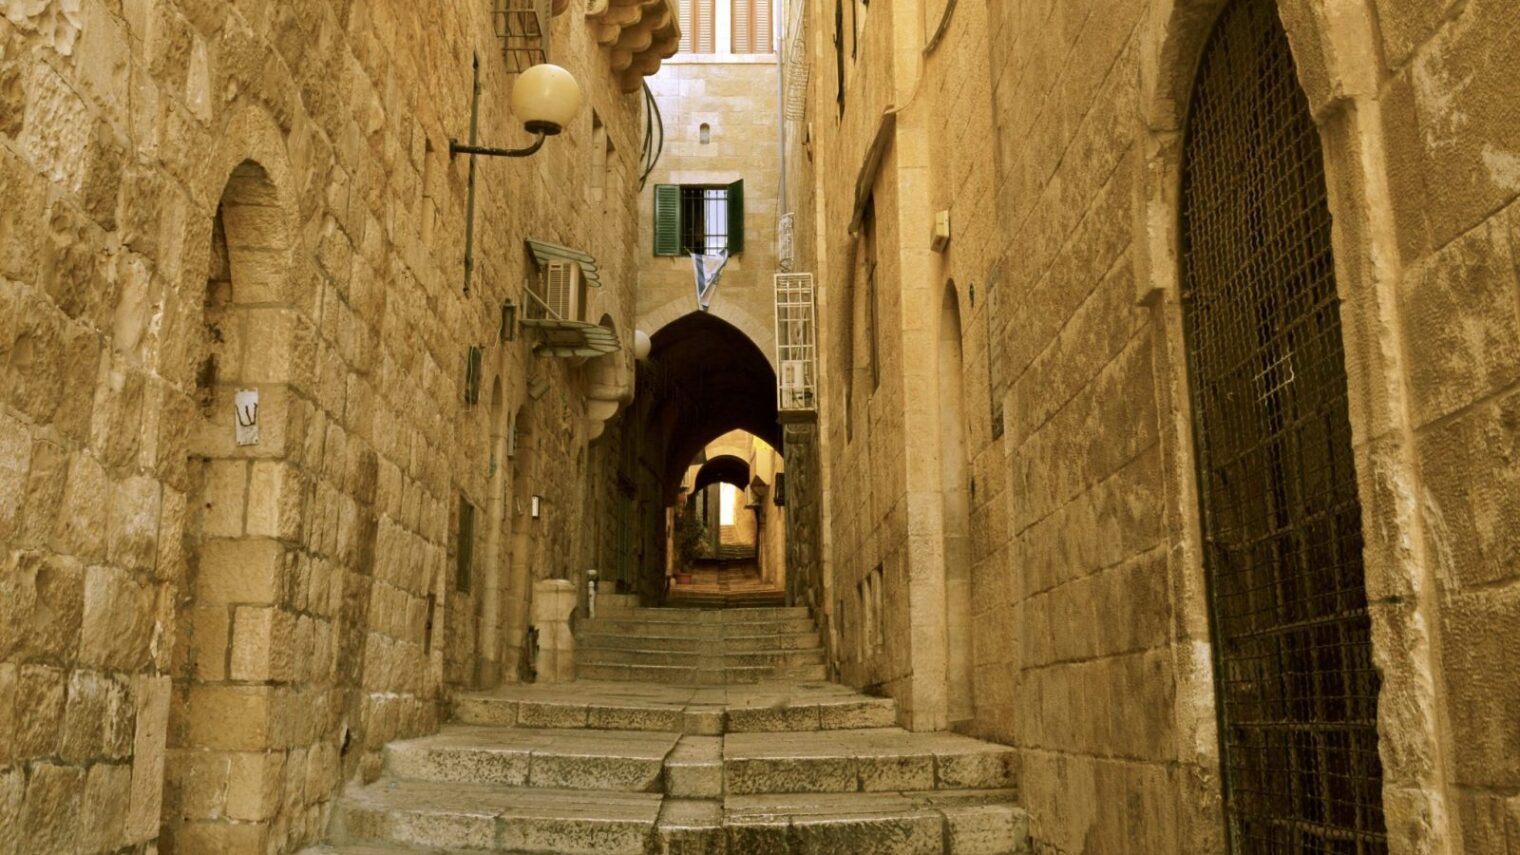 Because we have streets that look like this. Photo of a street in the Old City of Jerusalem by Daniel Santacruz